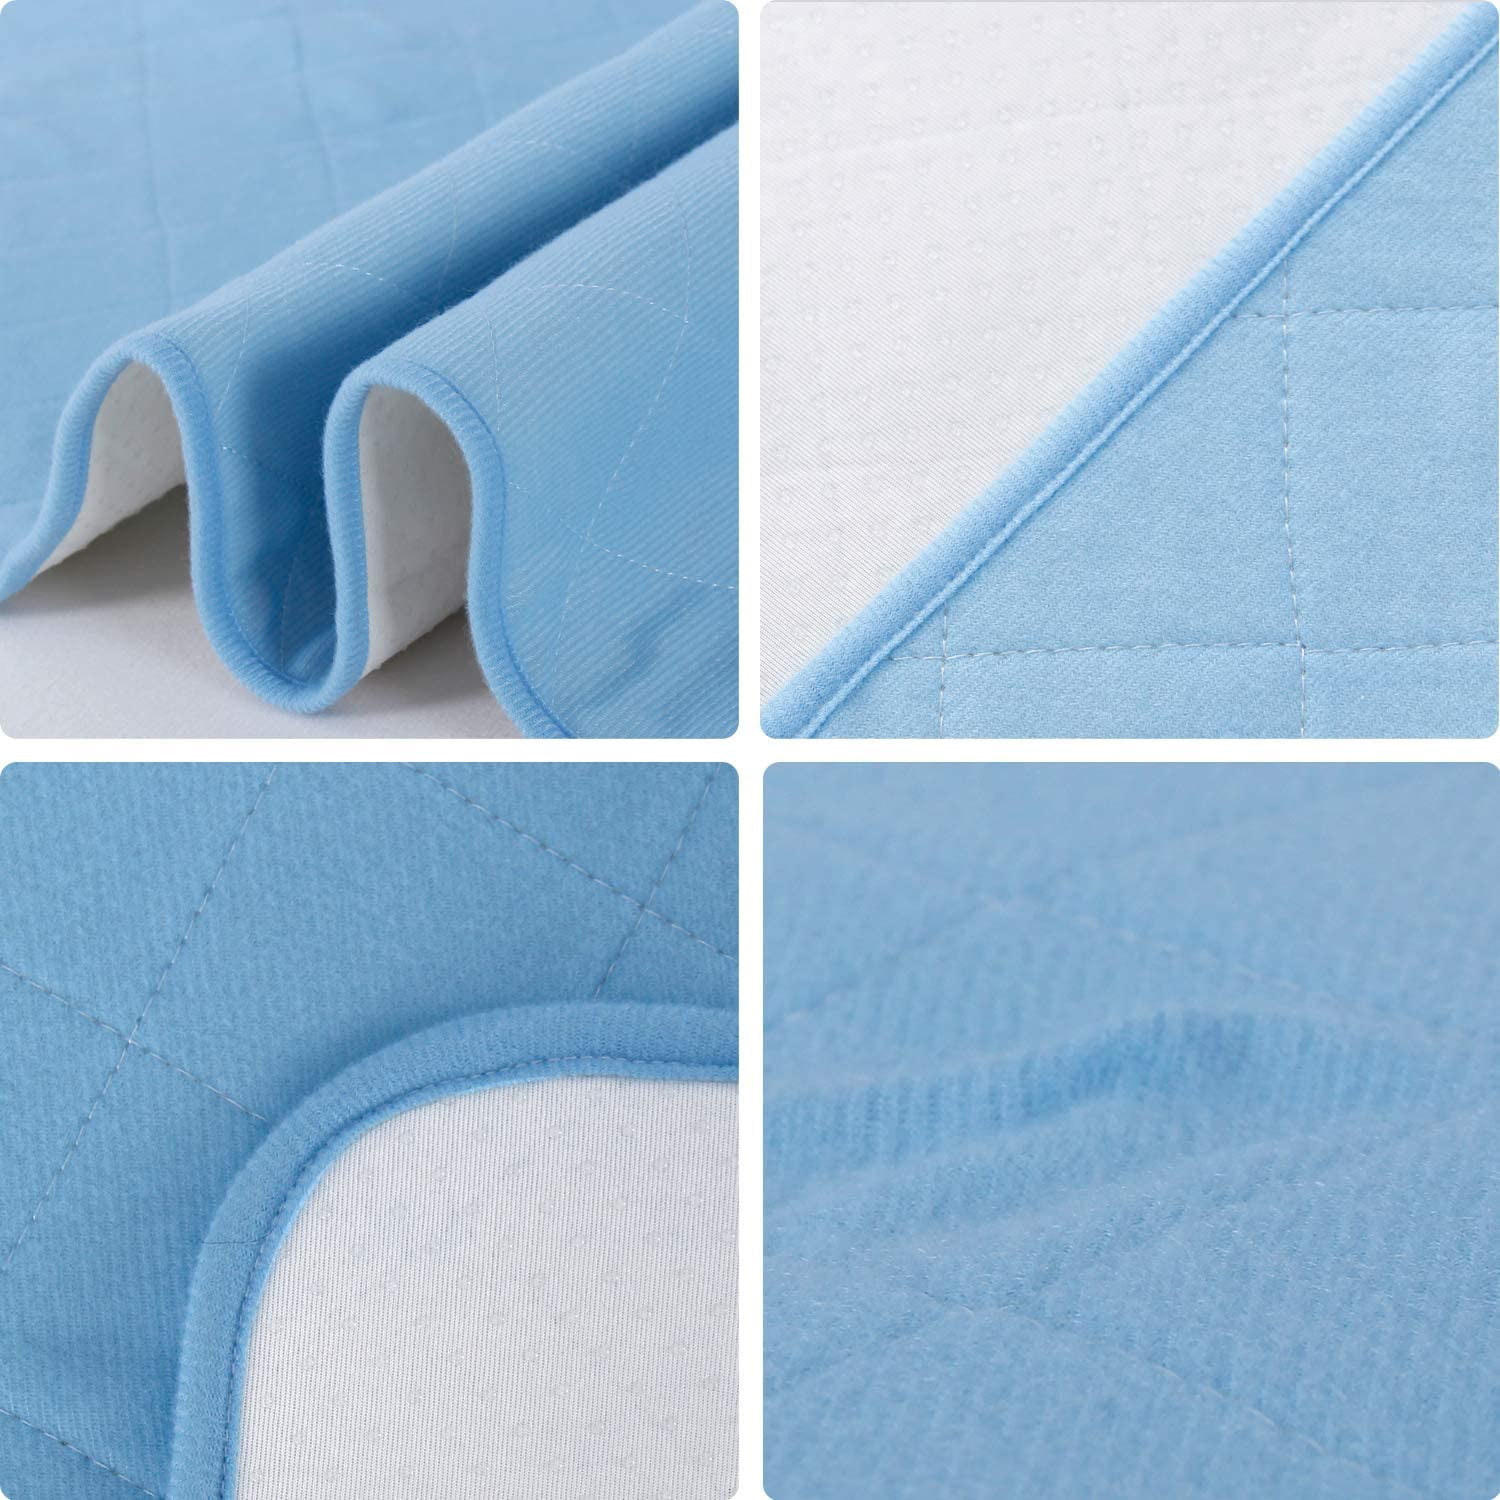 Waterproof Sheet and Mattress Protector 24 X 36,Non-Slip & Durable Wateproof Pad Mat for Baby Pack n Play/Crib/Mini Crib,Reusable Waterproof Bed Underpads for Baby，Adults Kids,Blue